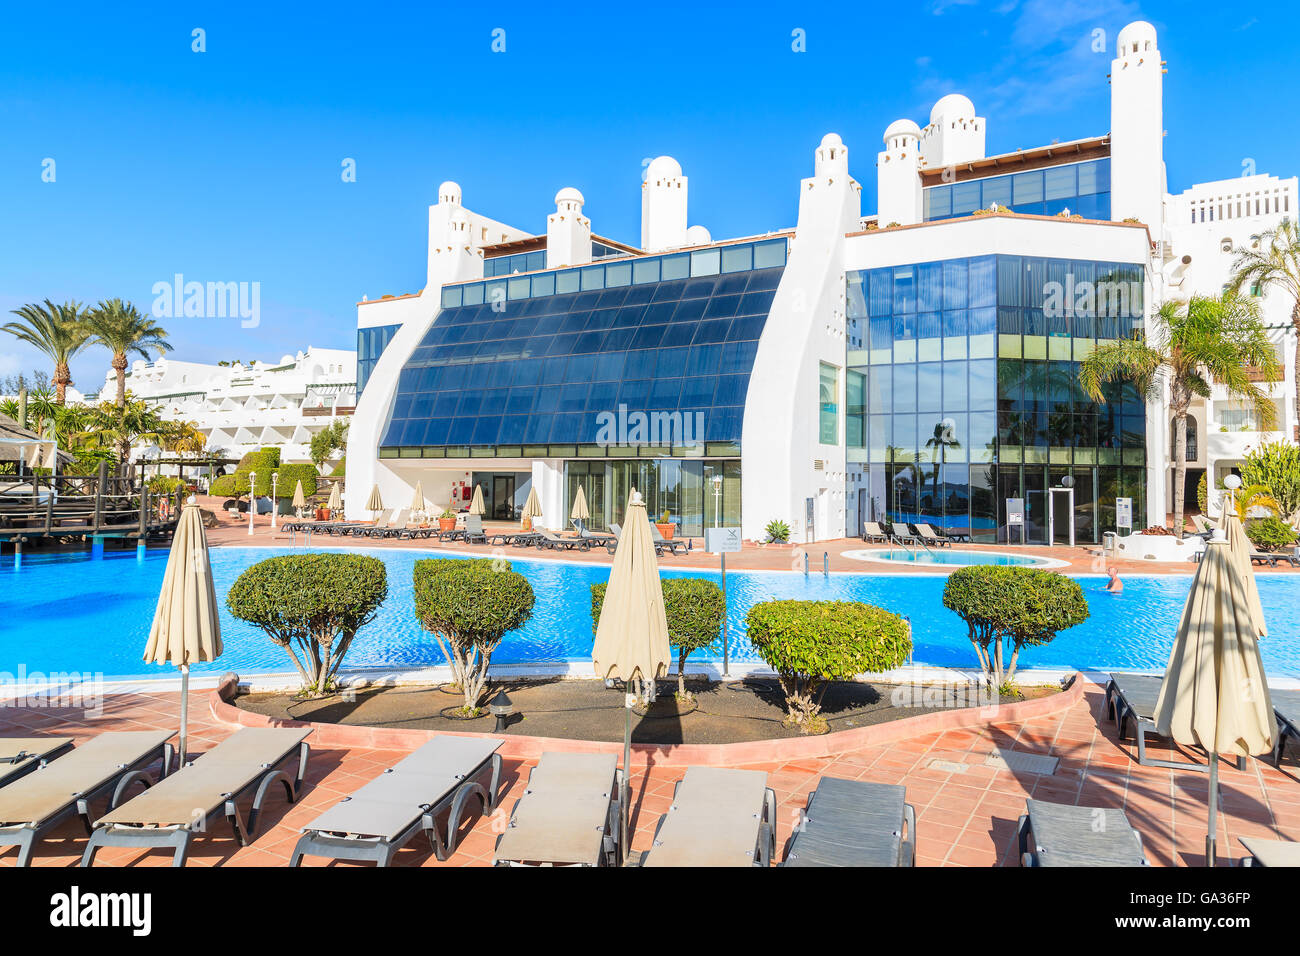 PLAYA BLANCA, LANZAROTE ISLAND - JAN 16, 2015: luxury hotel with pool in Playa Blanca holiday resort on coast of Lanzarote island. Many tourists come here to enjoy winter sunshine and relax. Stock Photo